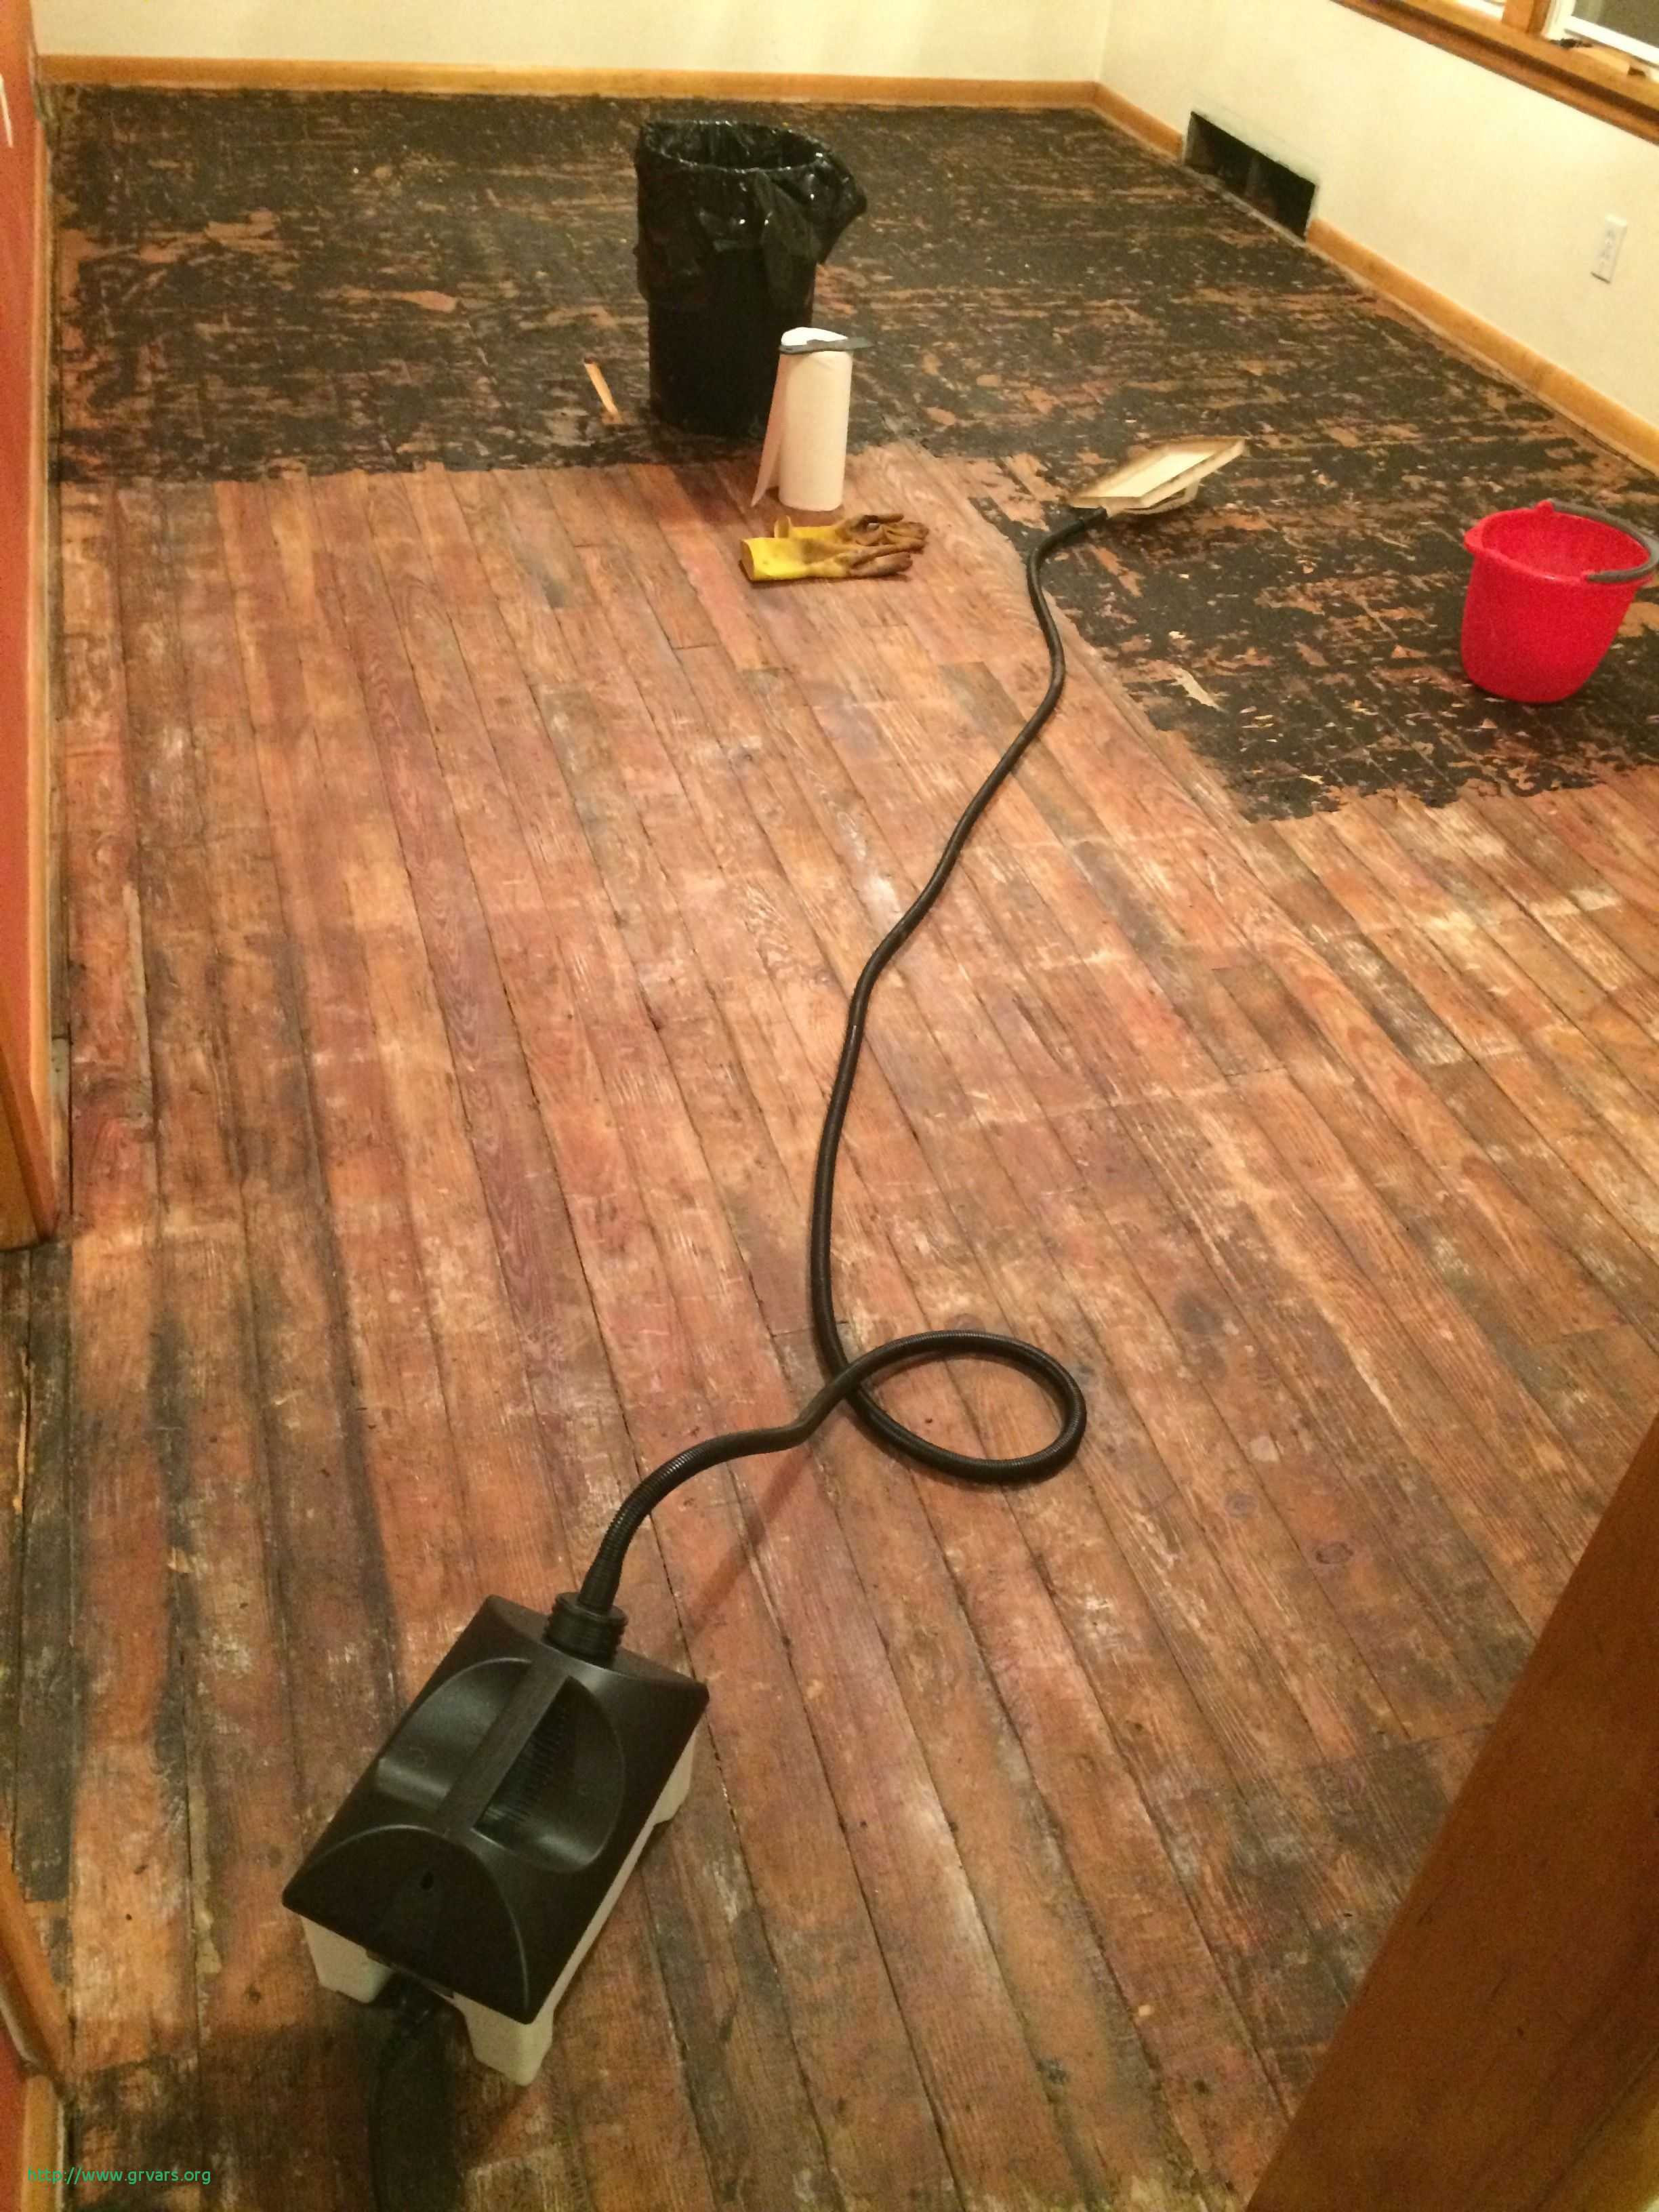 Underlayment for Glue Down Hardwood Floors Of 23 Nouveau How to Remove Glued Down Wood Flooring On Concrete Pertaining to Removing Glue From Hardwood Floors Luxury Removing Old Tar Paper and Glue From Hardwood Found Under